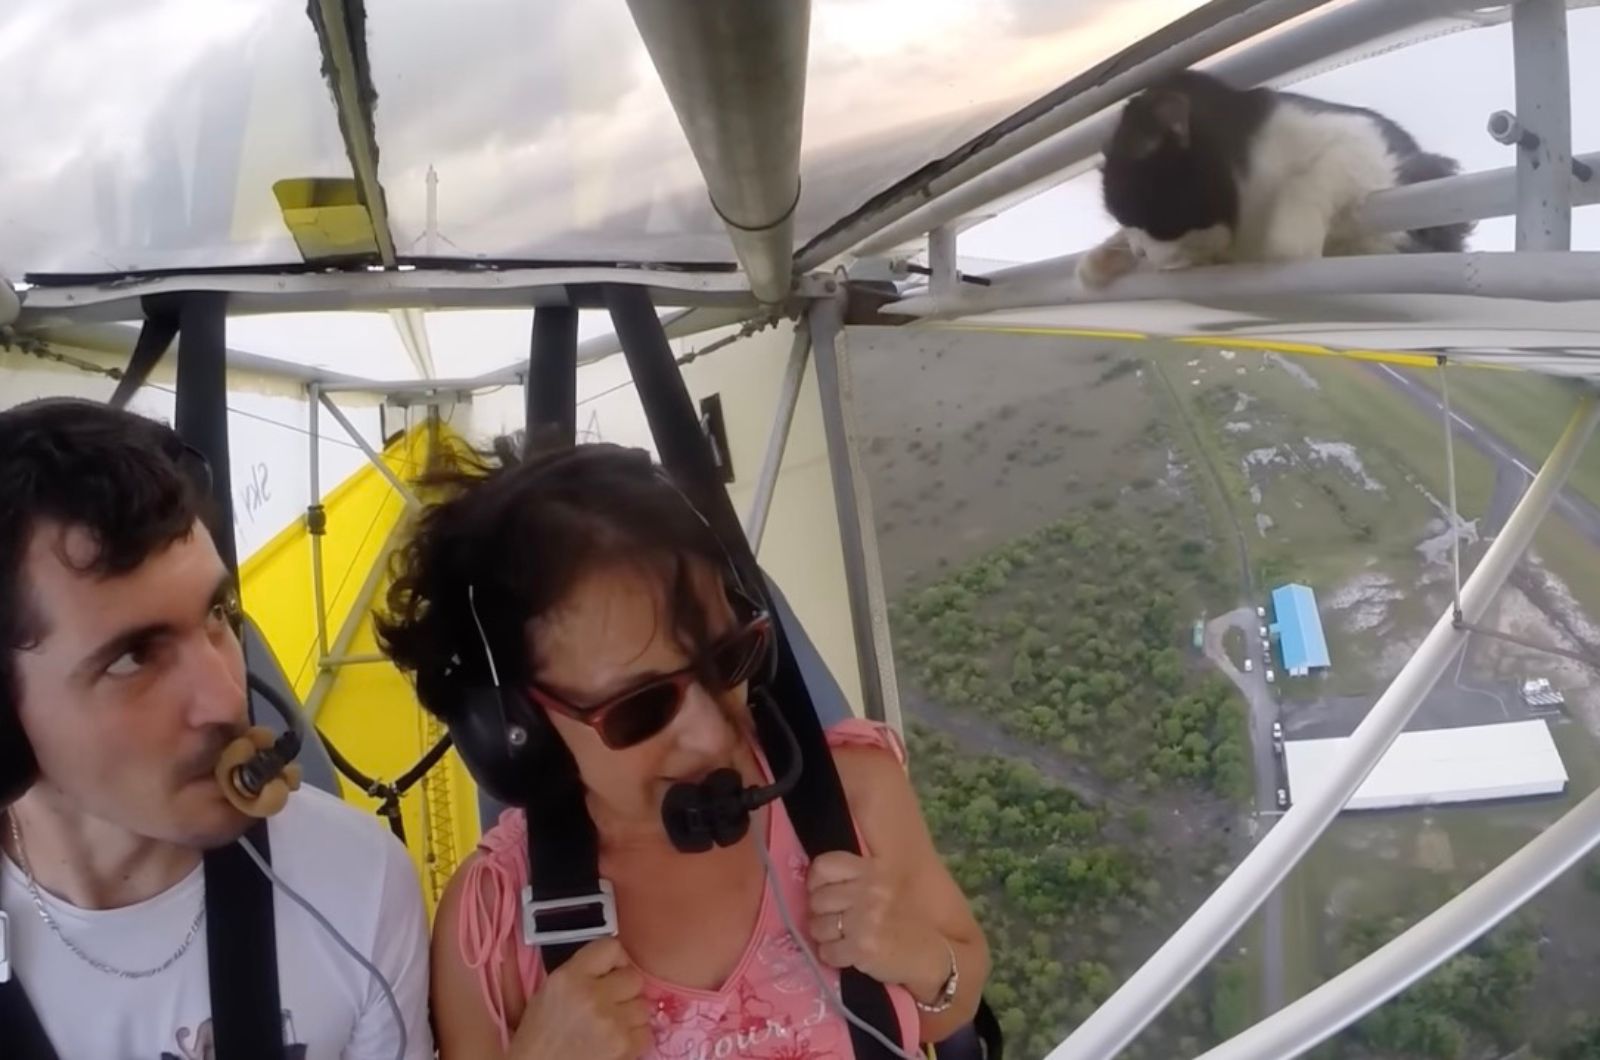 man and woman in a plane looking at cat